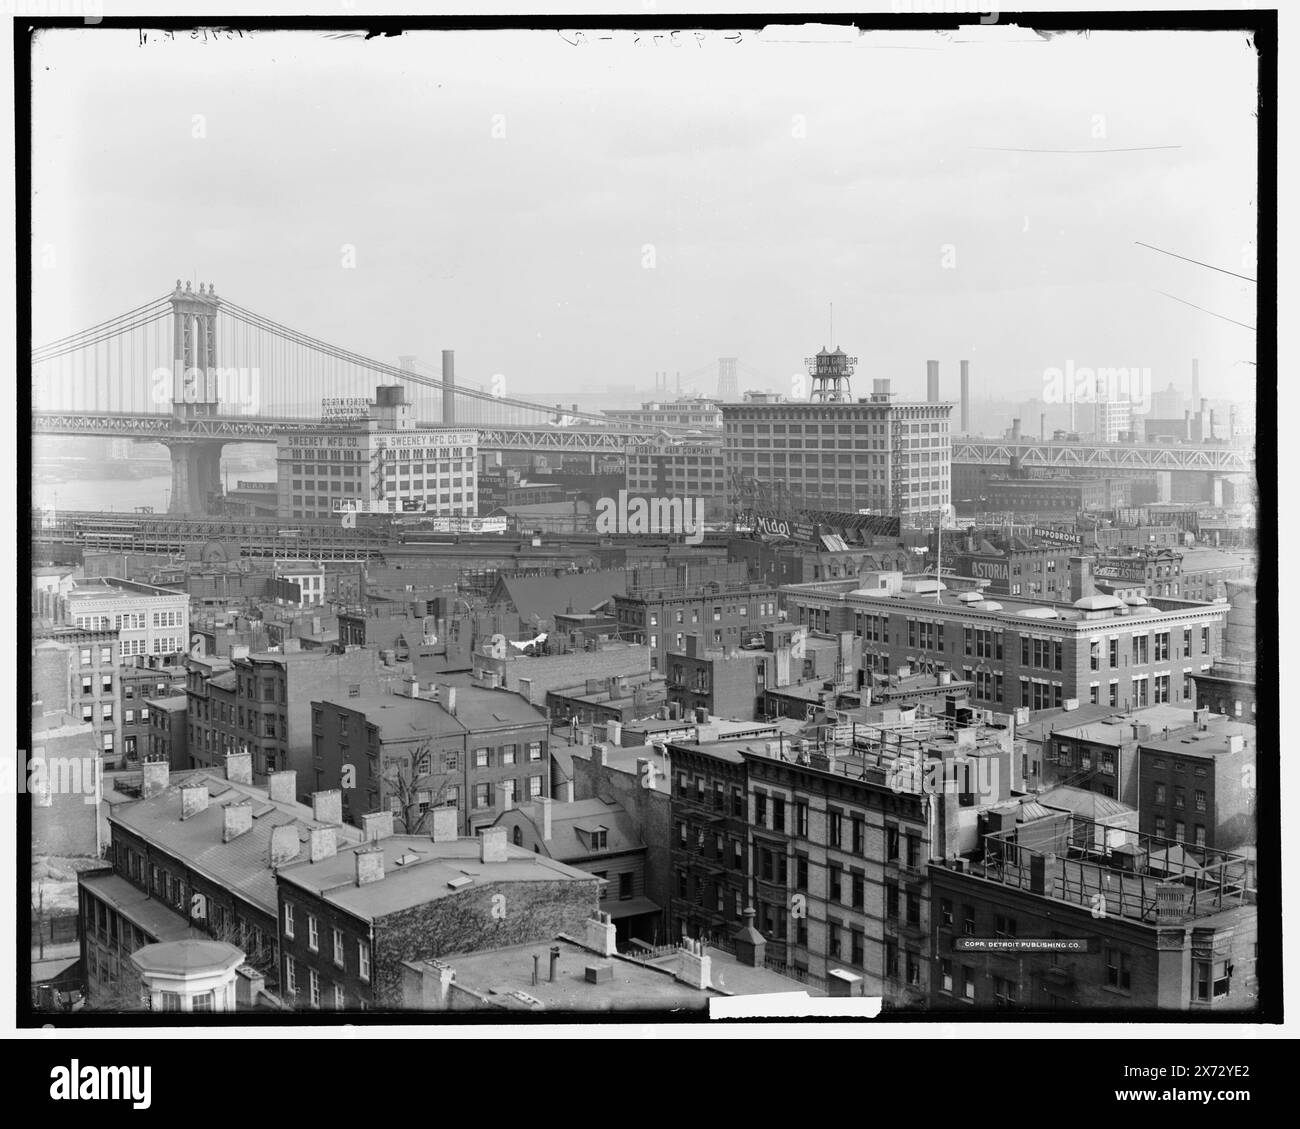 New York sky line from Brooklyn, Left left center negative broken upper left corner and taped to second sheet of glass., Brooklyn Bridge in right right center and right center sections; Singer Building and Woolworth Building in center sections., Videodisc images are out of sequence; actual left to right order for the negatives is 1A-10526, 10525, 10524, 10523, 10522, 10521, 10520., Transparency is same view as D4-15713 C., Corresponding glass transparency (with same series code) available on videodisc frame 1A-29851., 'G 93[, .],' 'LLC,' 'LC,' 'G 9373 C,' '[, .] RC,' 'G 9737 [, .],' and 'G 937 Stock Photo